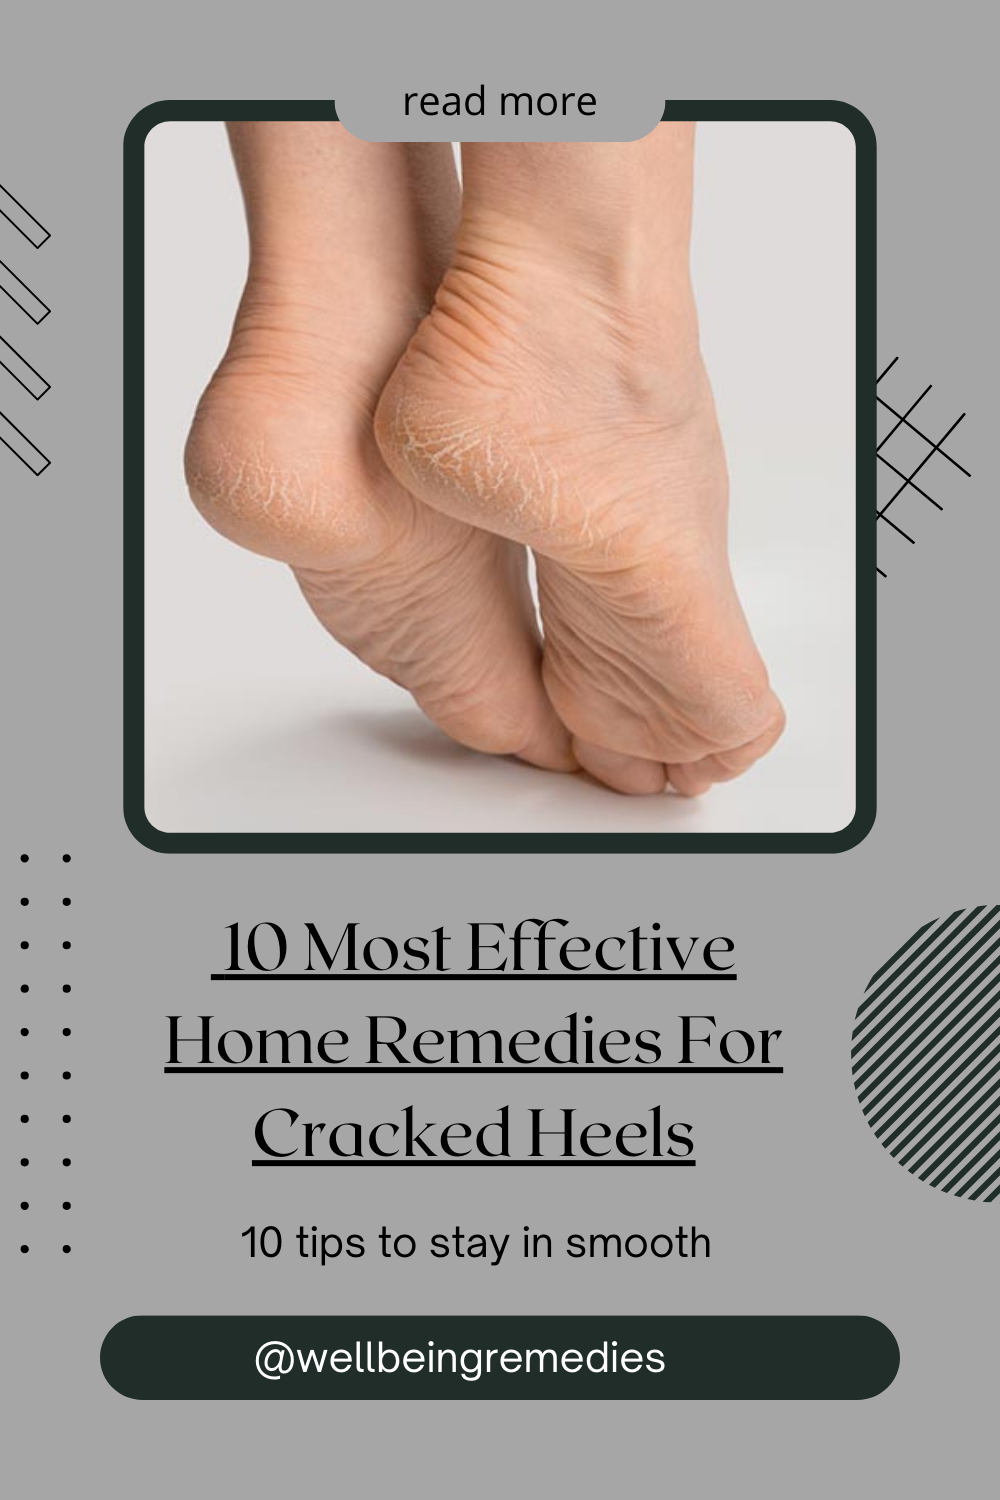 10 Most Effective Home Remedies For Cracked Heels